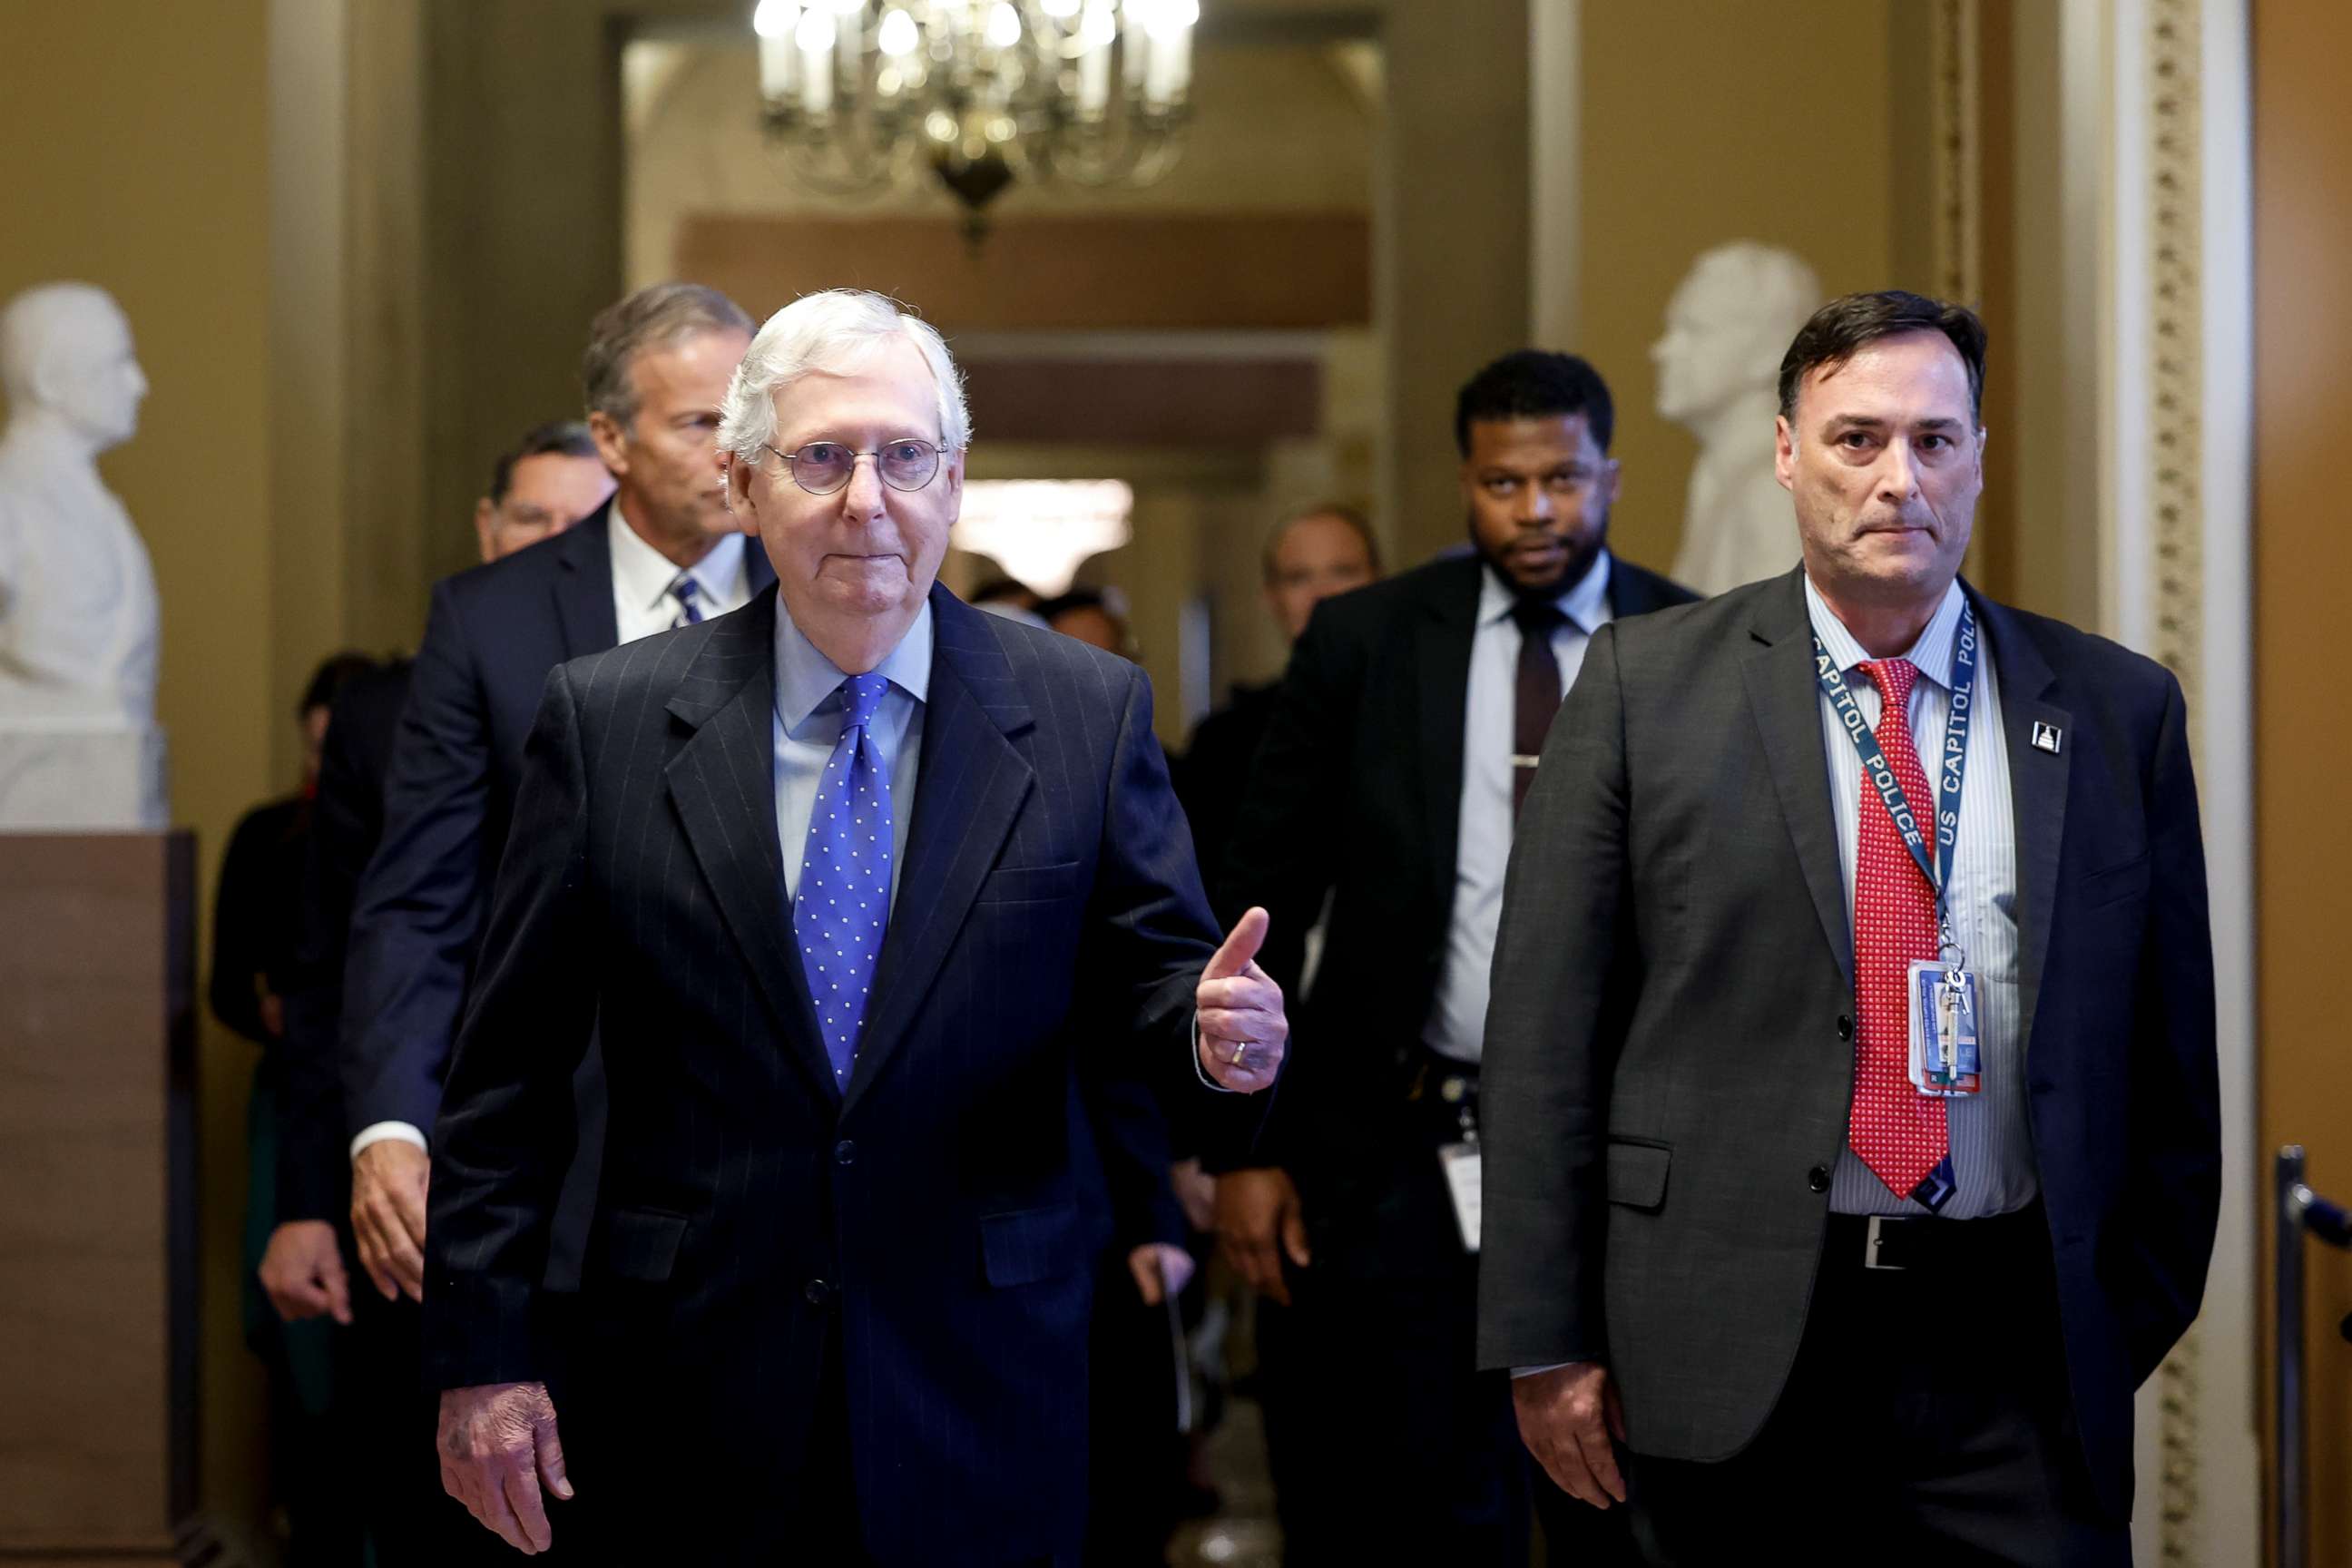 PHOTO: Senate Minority Leader Mitch McConnell gives a thumbs up as he leaves a meeting with Senate Republicans at the U.S. Capitol, Nov. 16, 2022, in Washington.